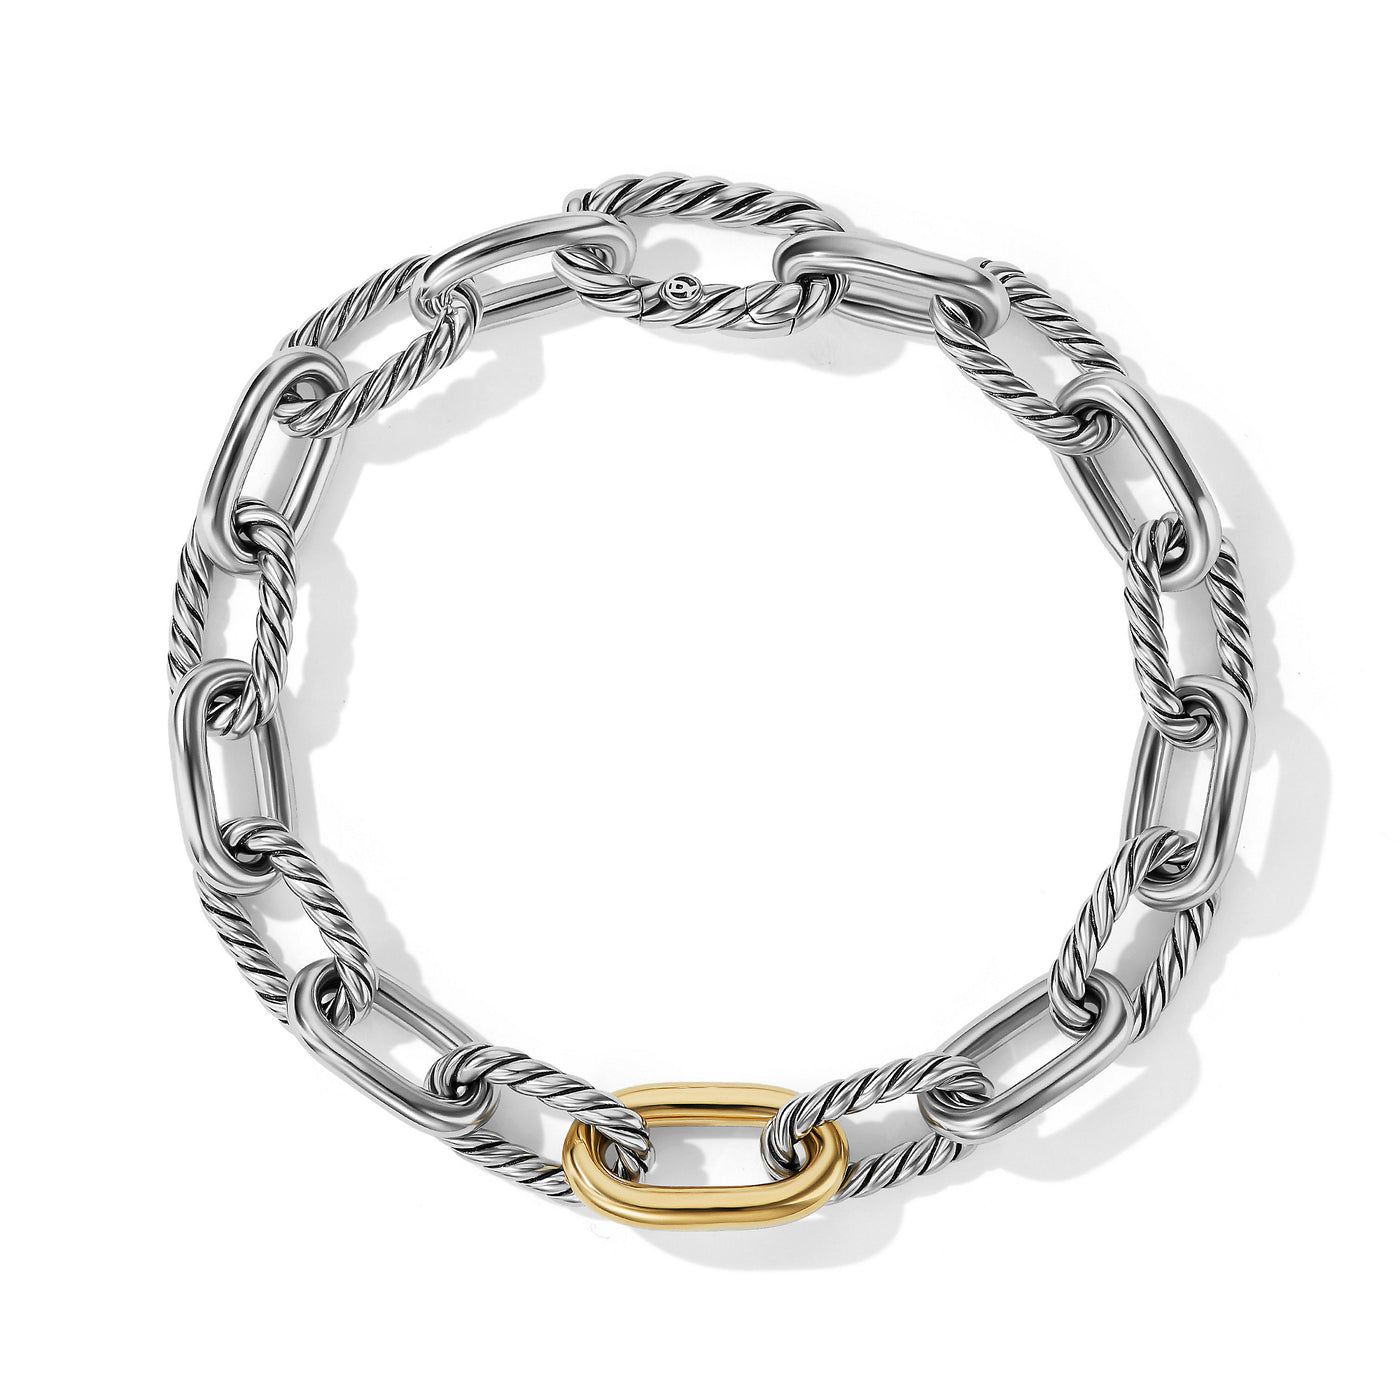 DY Madison® Chain Bracelet in Sterling Silver with 18K Yellow Gold\, 8.5mm